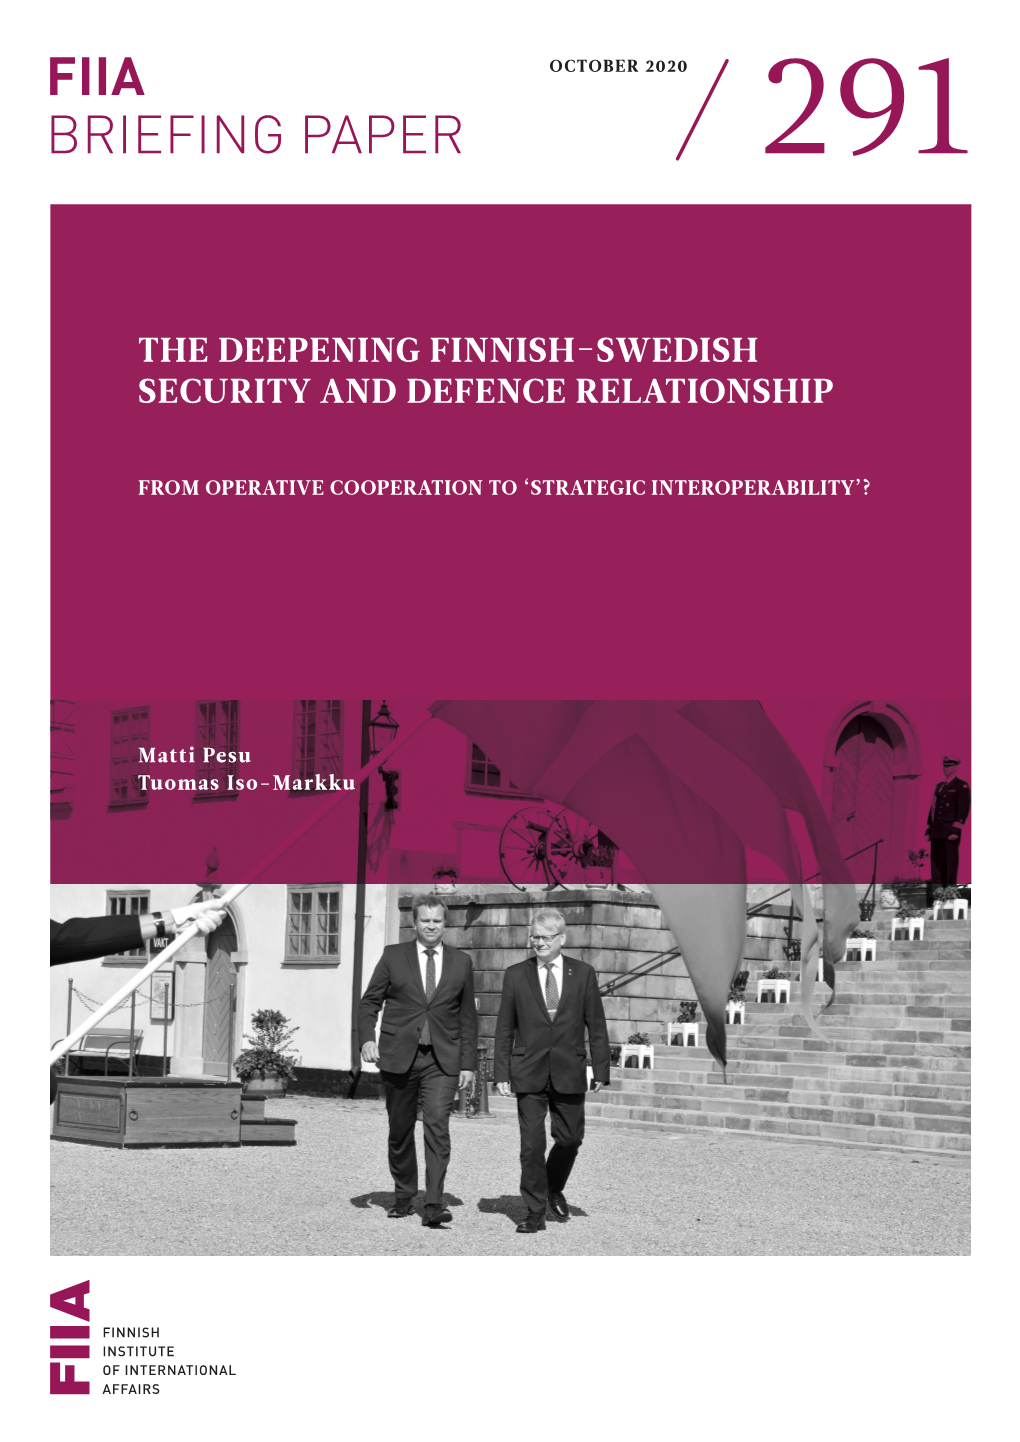 The Deepening Finnish-Swedish Security and Defence Relationship